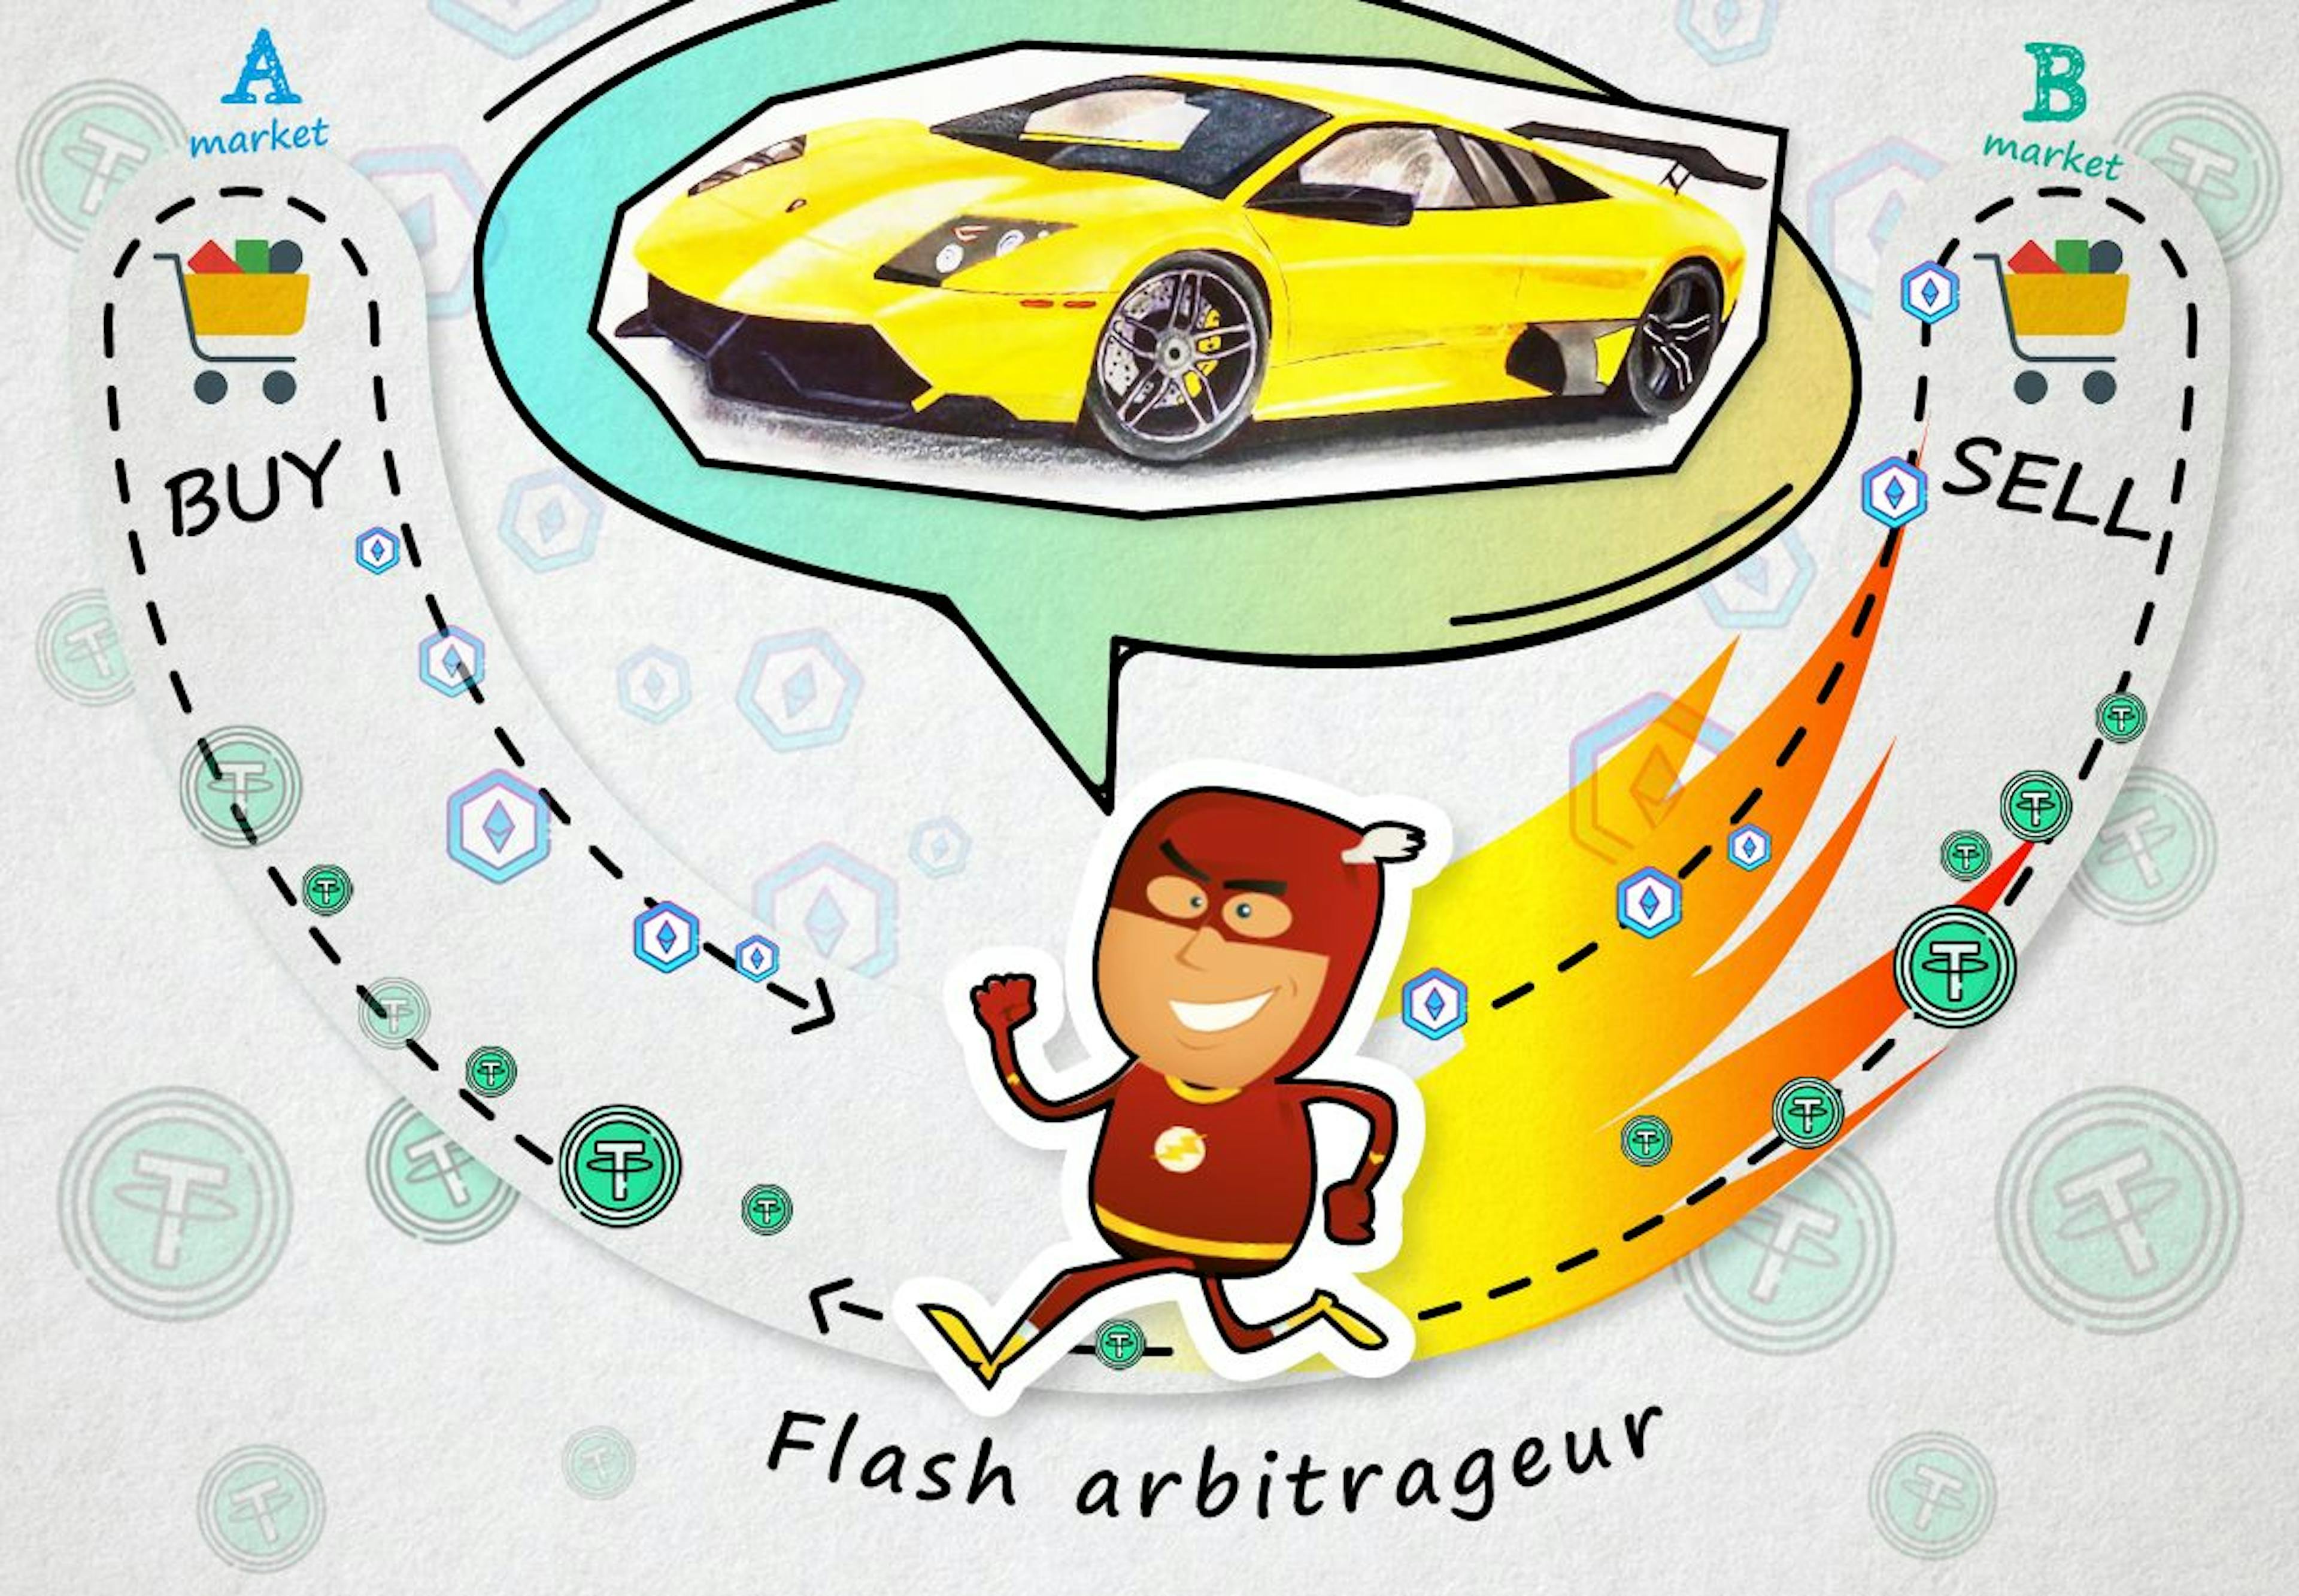 /can-you-earn-a-lambo-by-being-a-flash-arbitrageur-on-bnb-smart-chain feature image